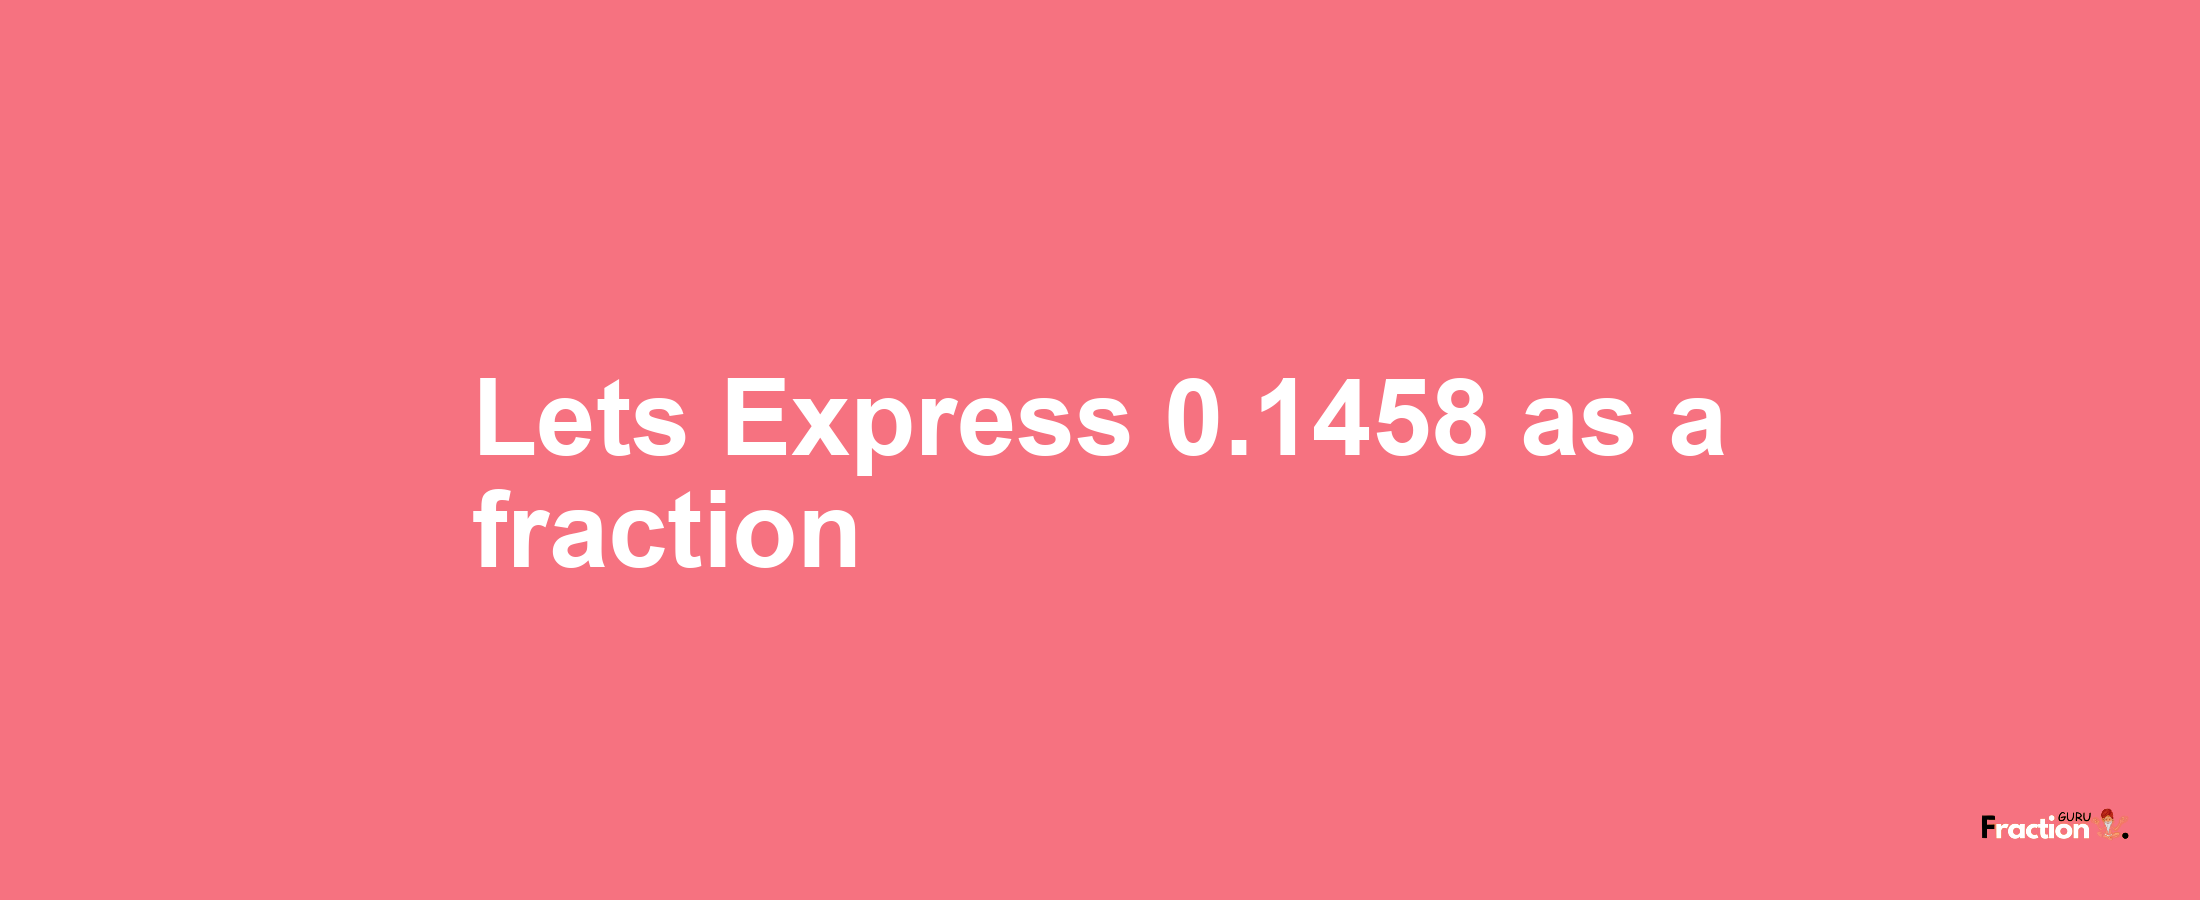 Lets Express 0.1458 as afraction